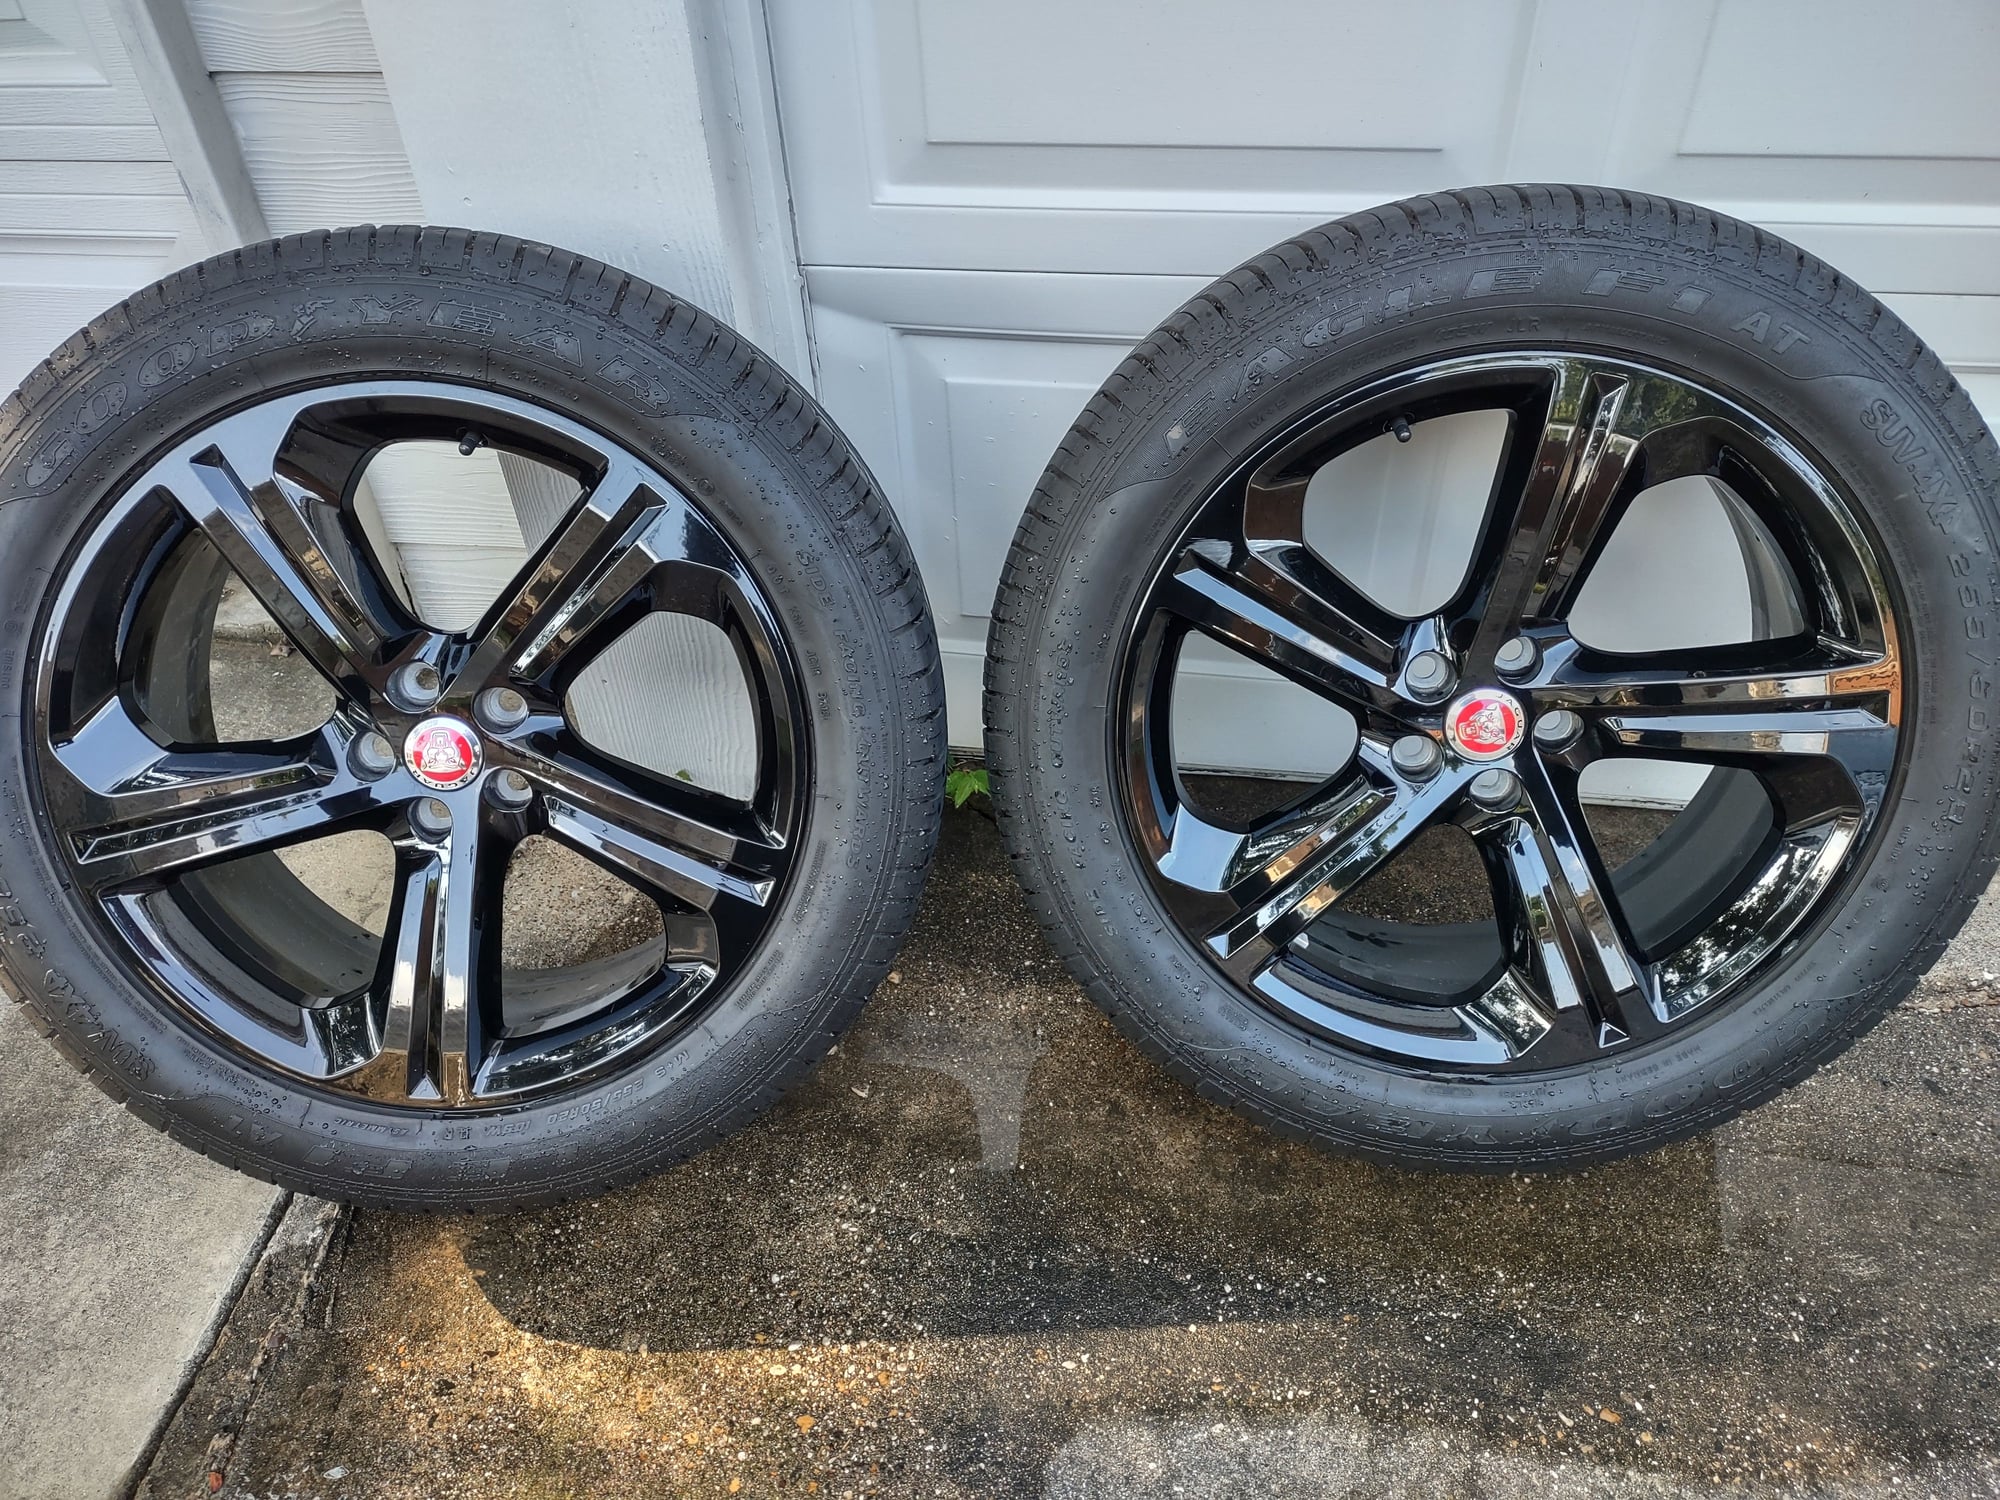 Wheels and Tires/Axles - Update your F-Pace wheels! Selling 20" black 5 spoke wheels... - Used - 2017 to 2024 Jaguar F-Pace - Dallas, TX 75218, United States